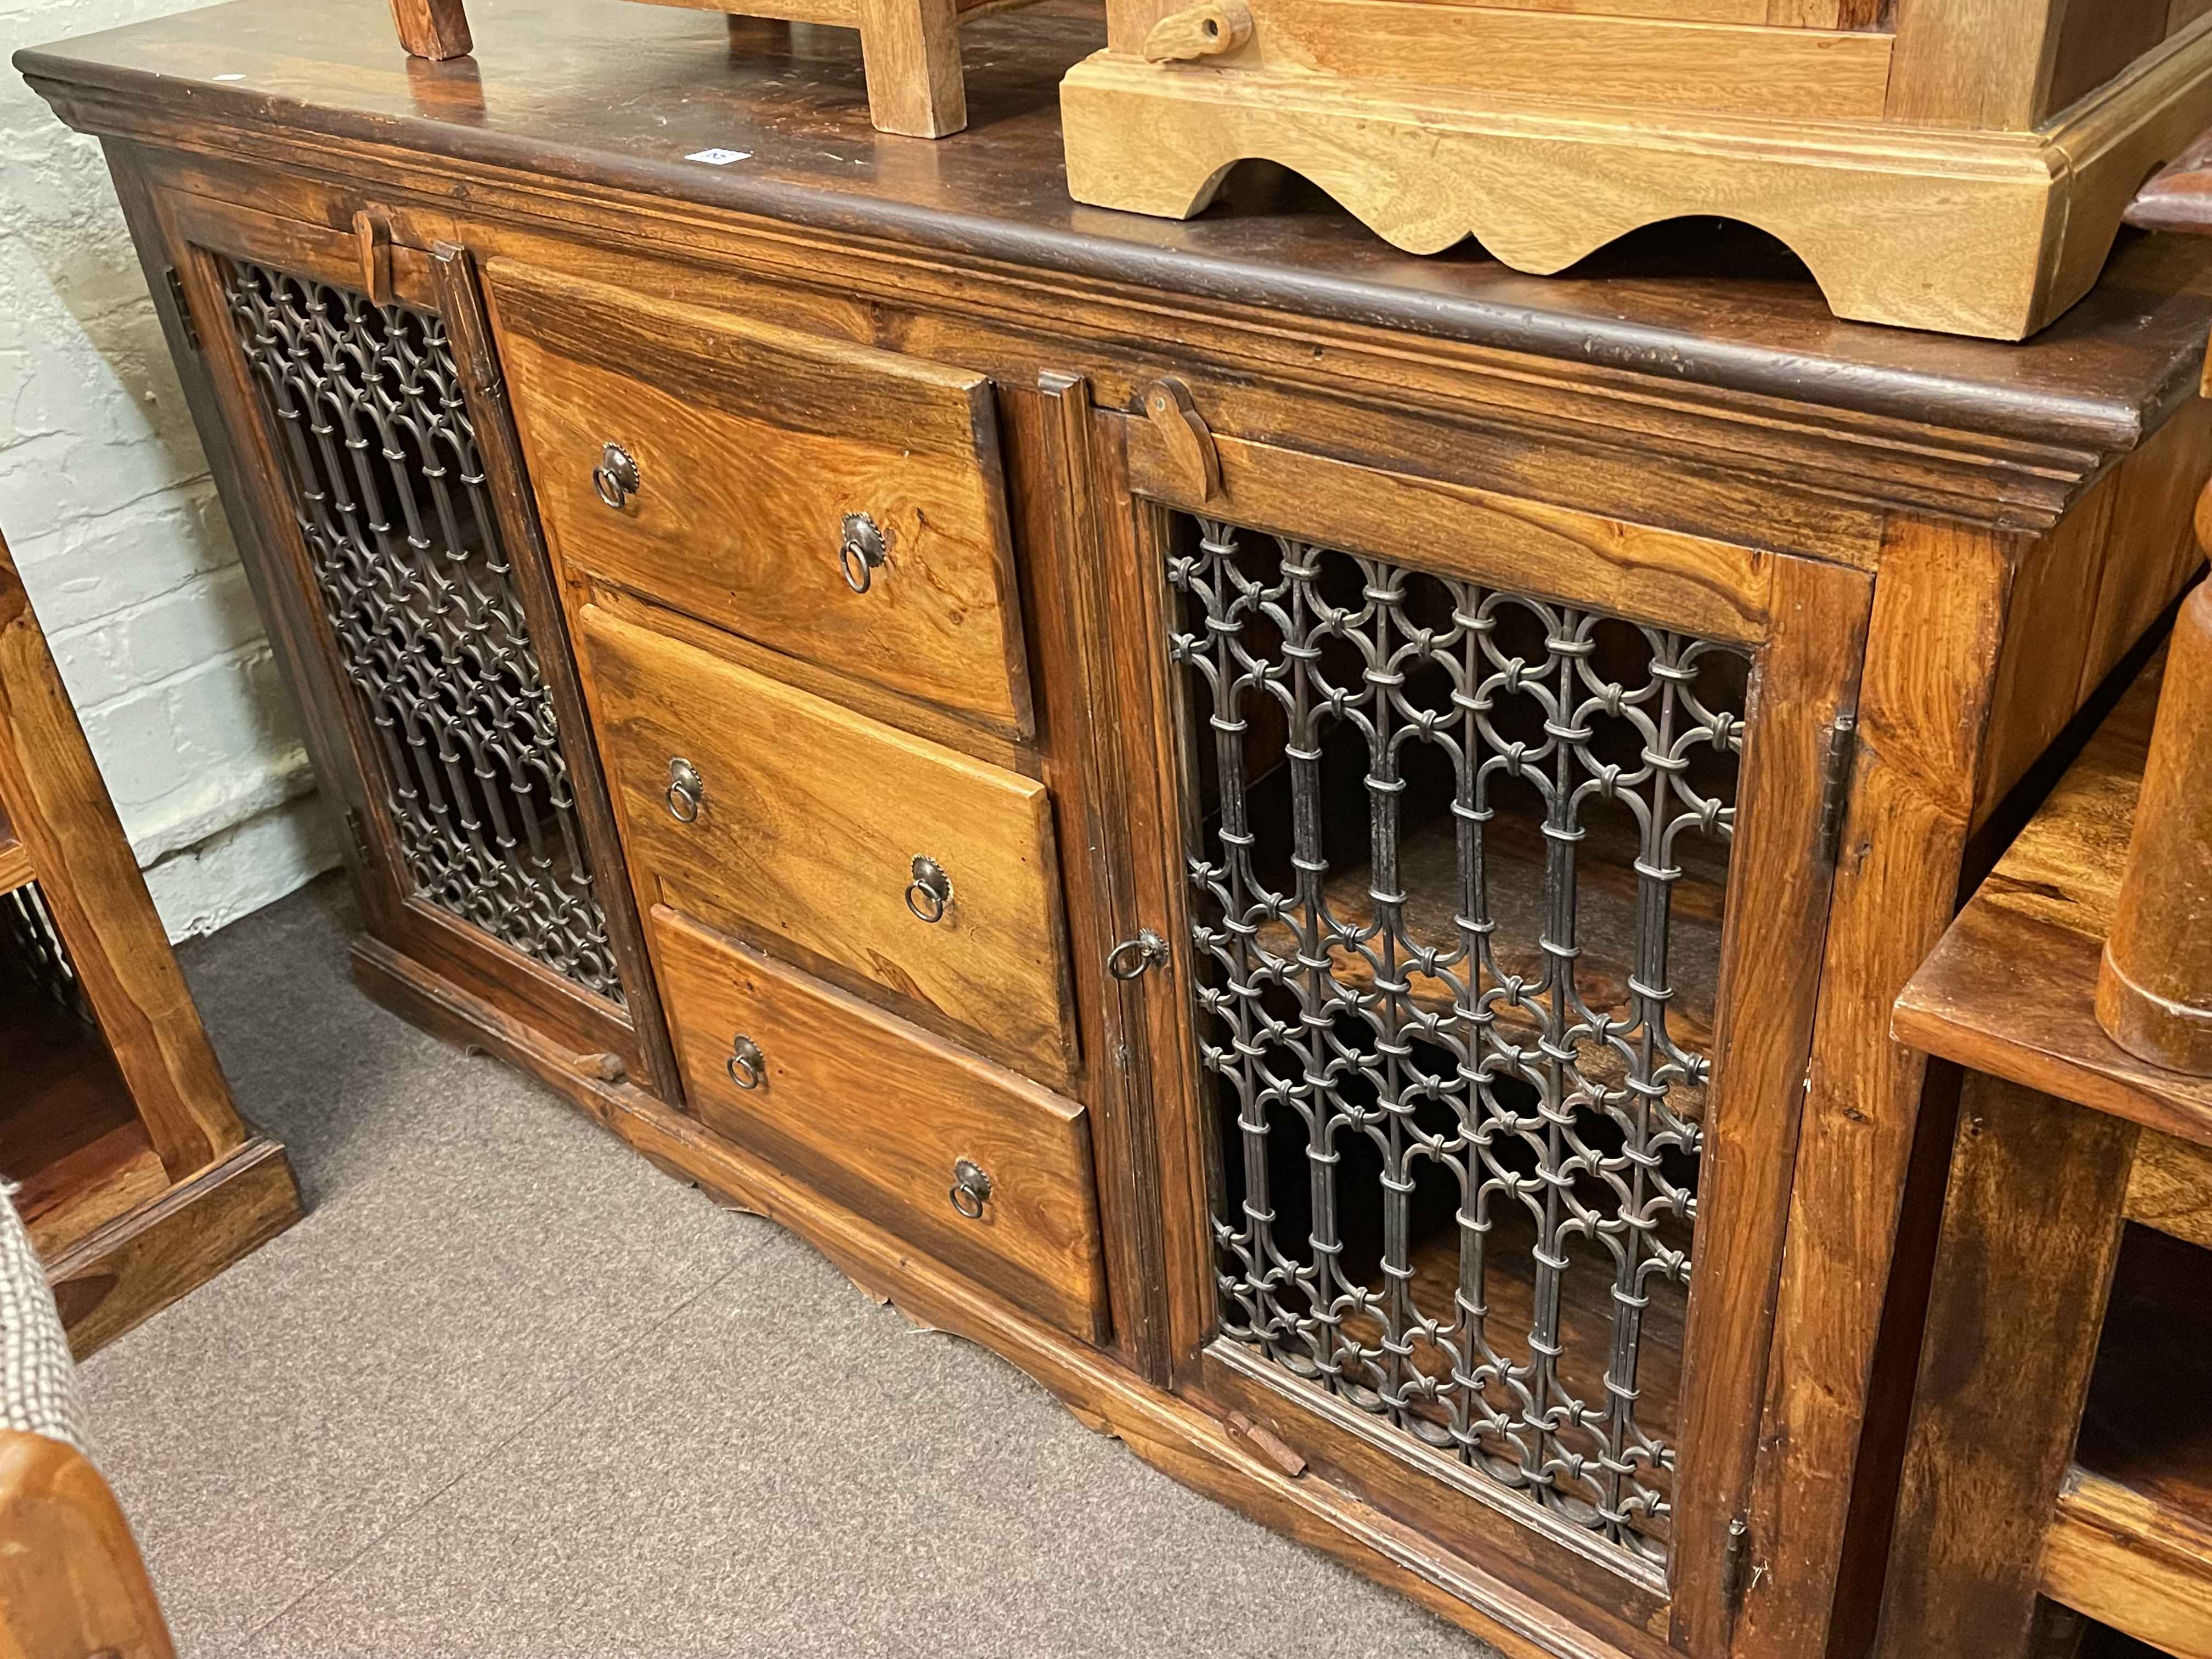 Indian style hardwood and pierced metal decorated two door sideboard, entertainment unit, - Image 2 of 3